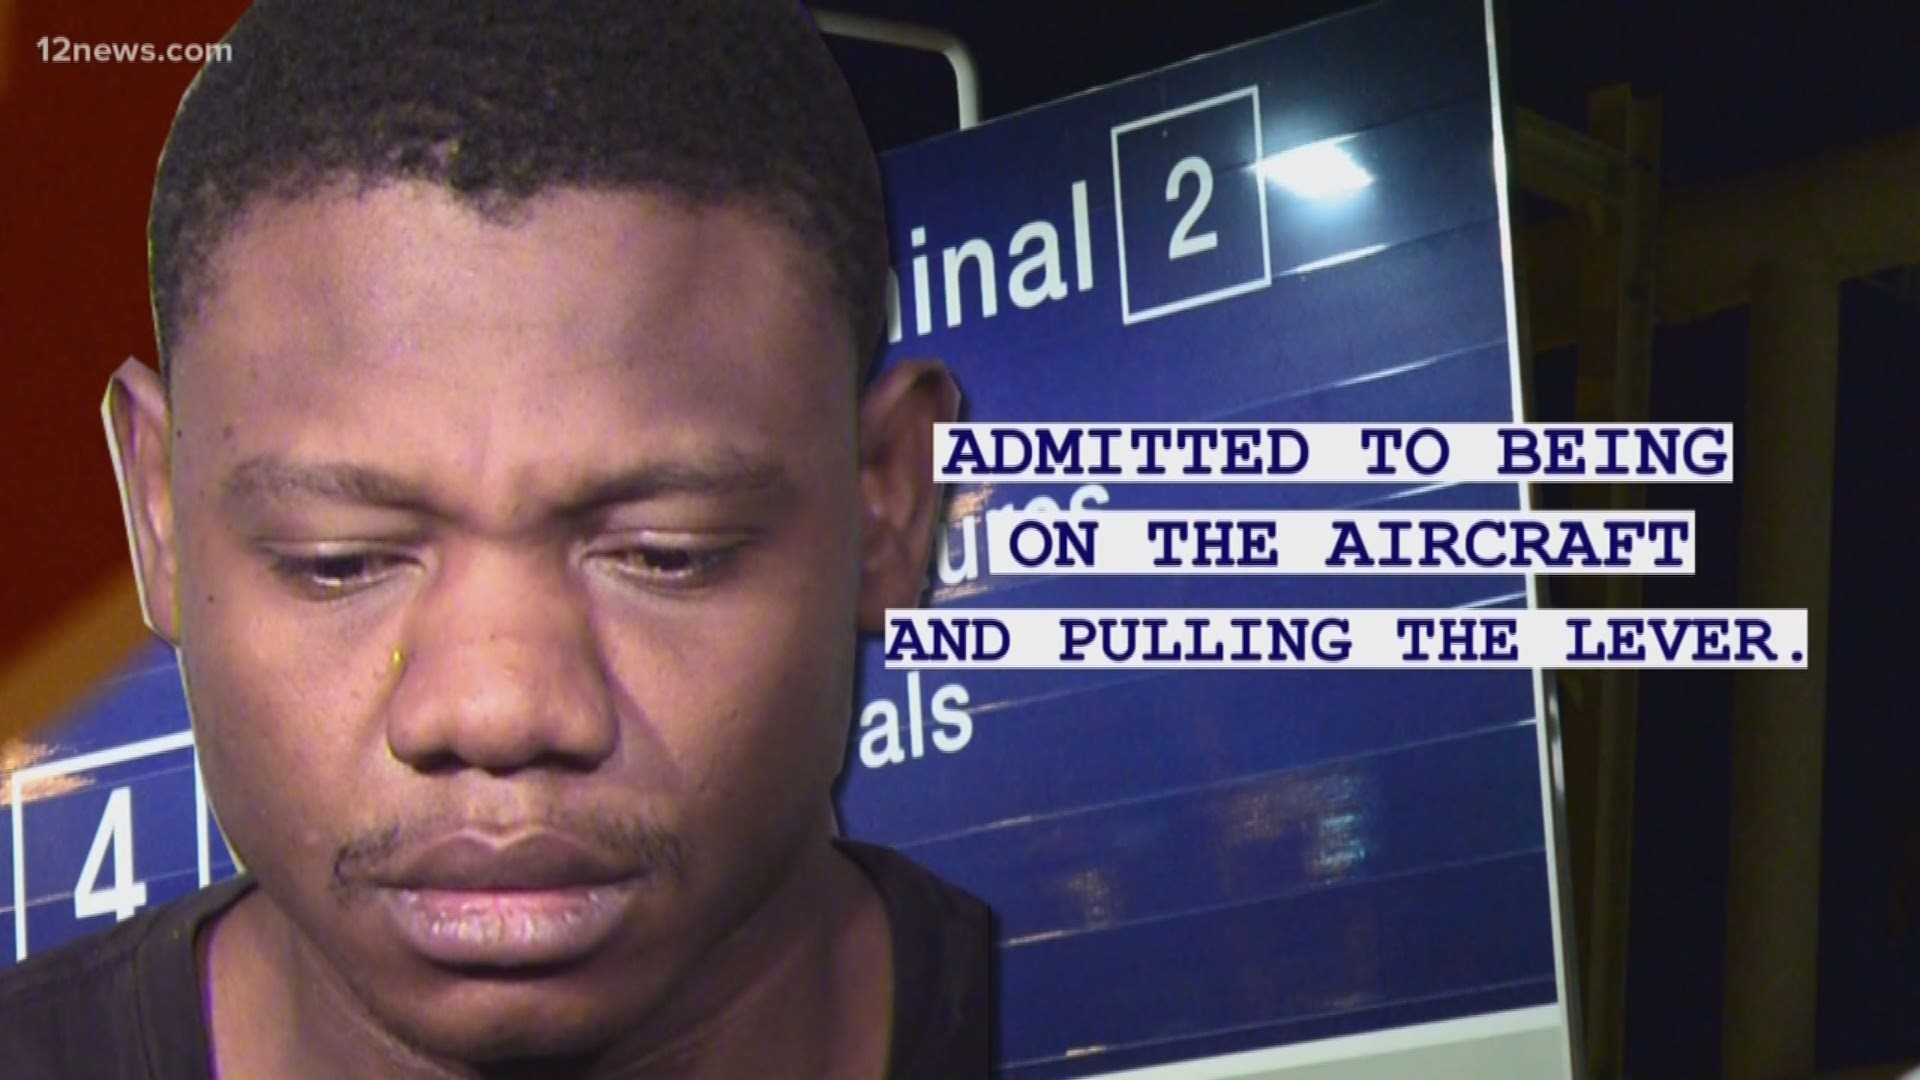 A man is facing multiple charges after police say he accessed a restricted area at Phoenix Sky Harbor Airport and activated a plane's emergency slide.